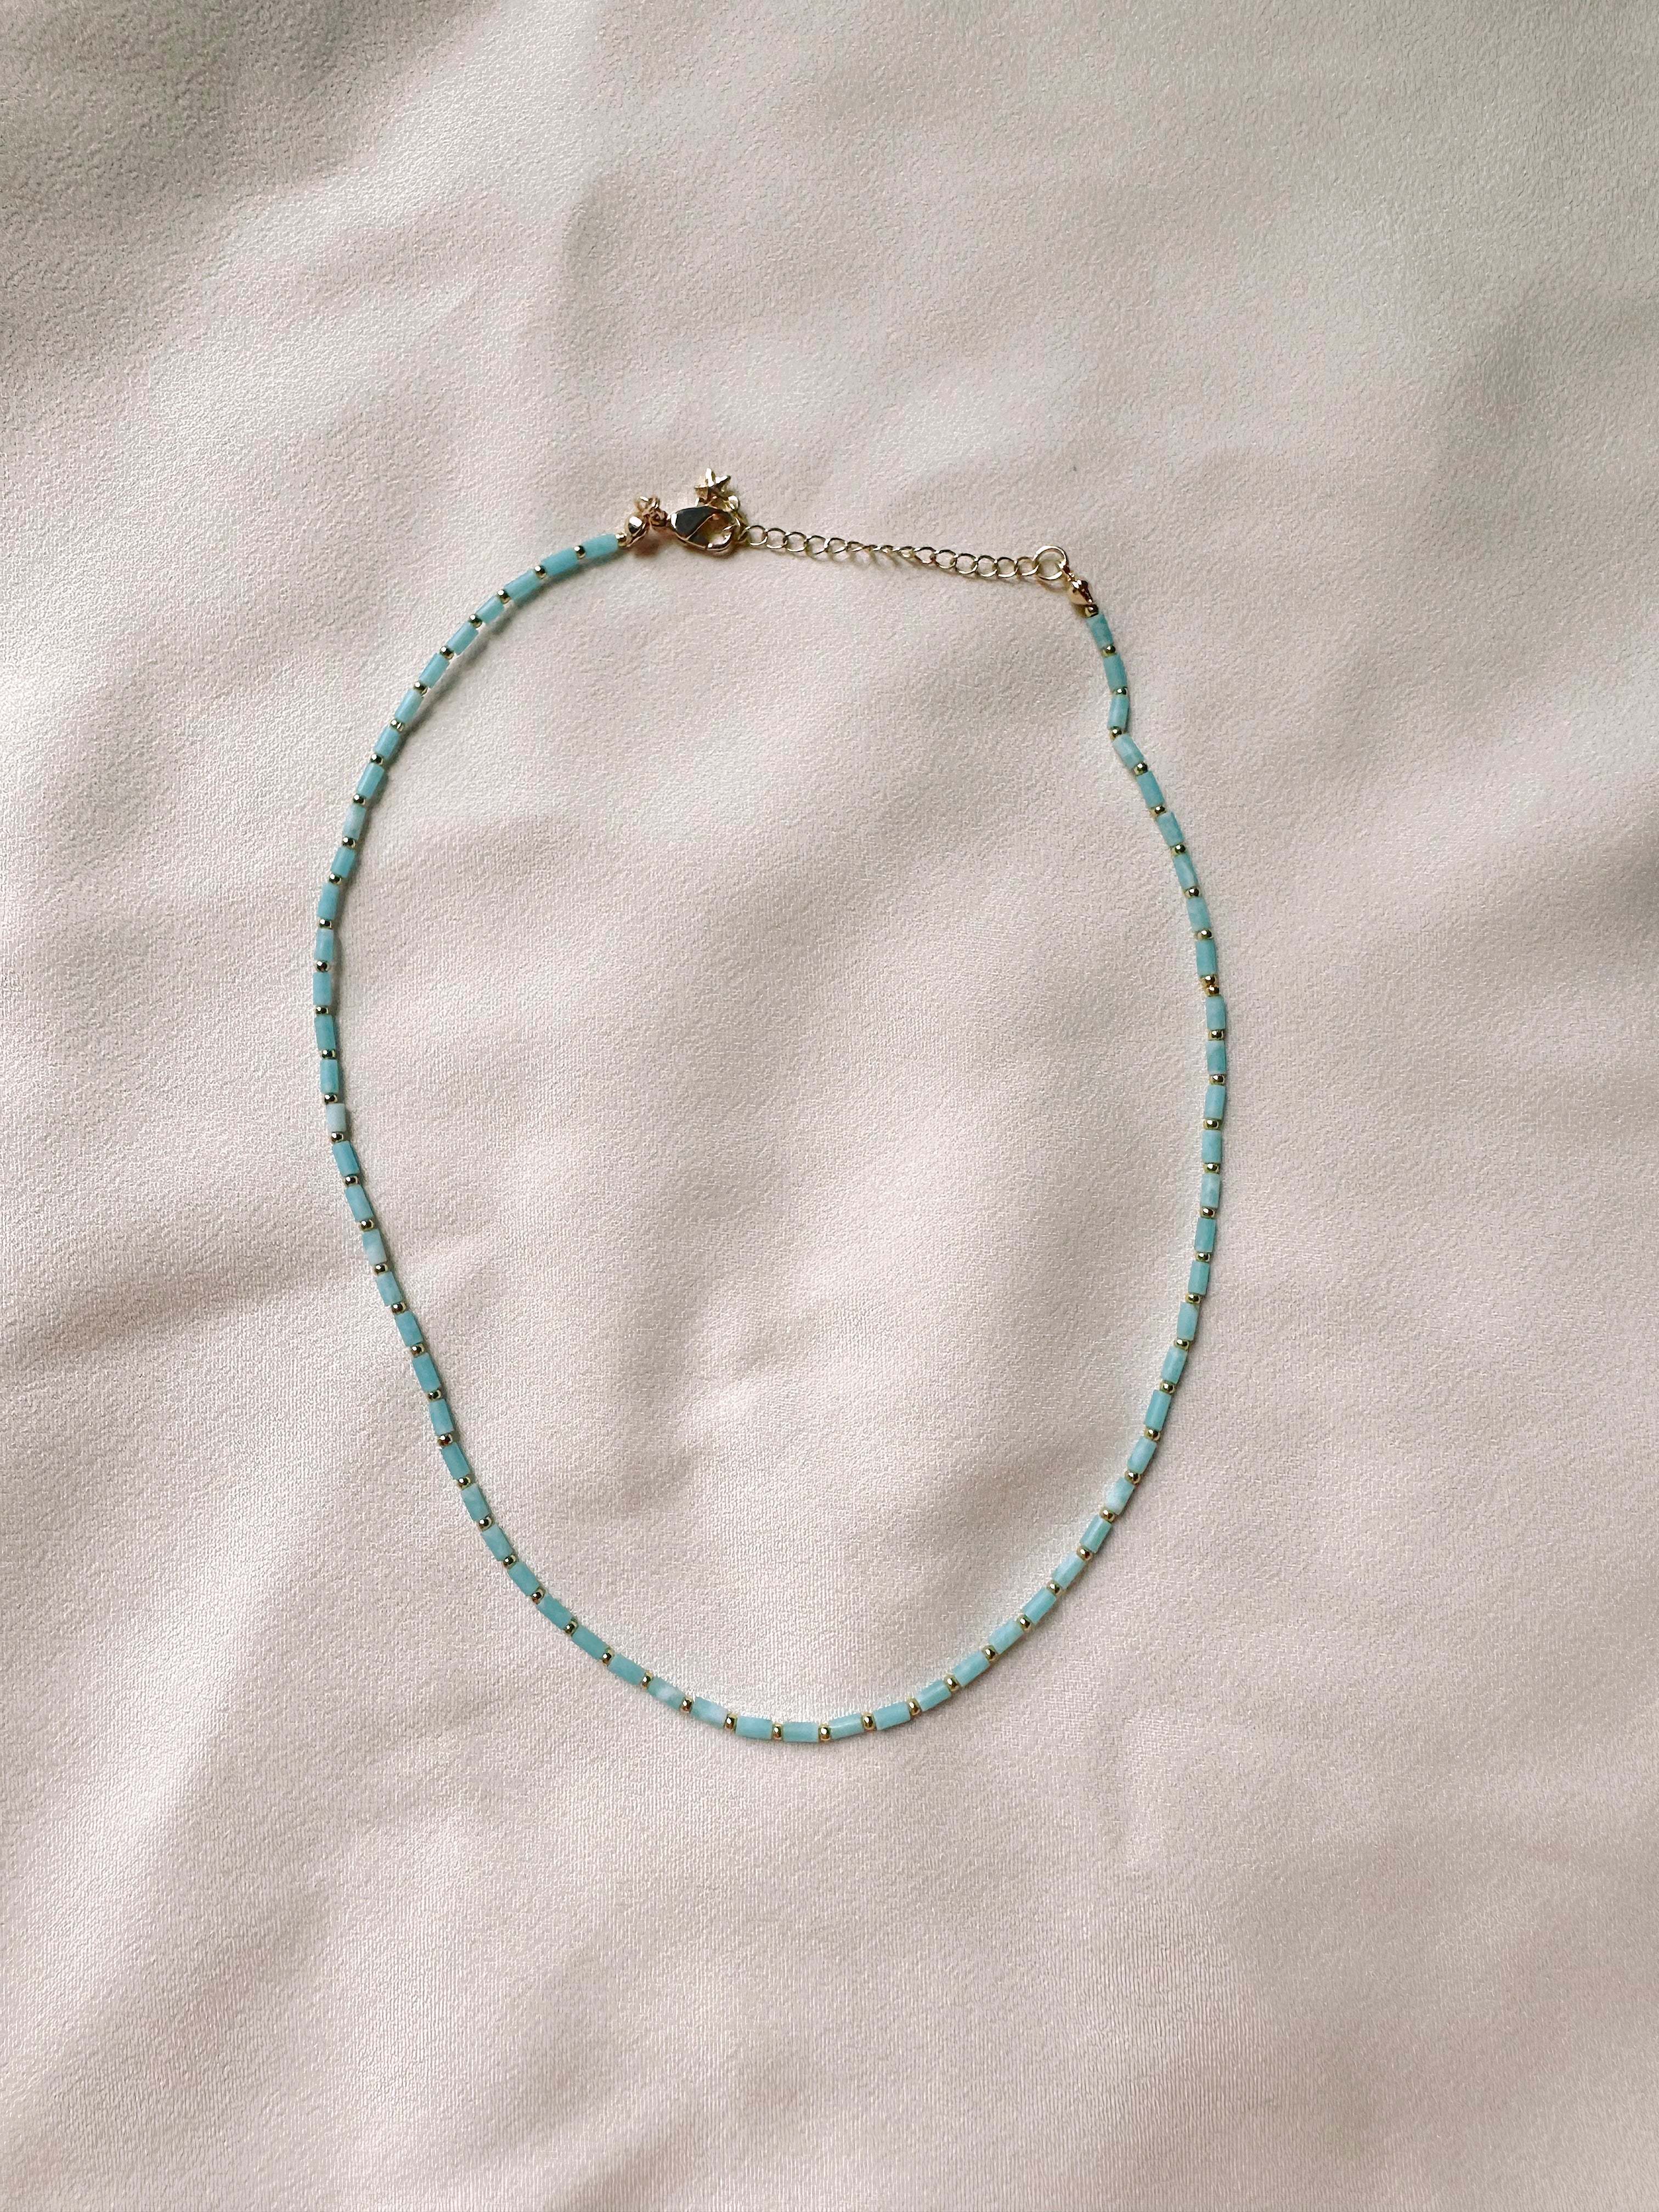 Perfect Beaded Necklace